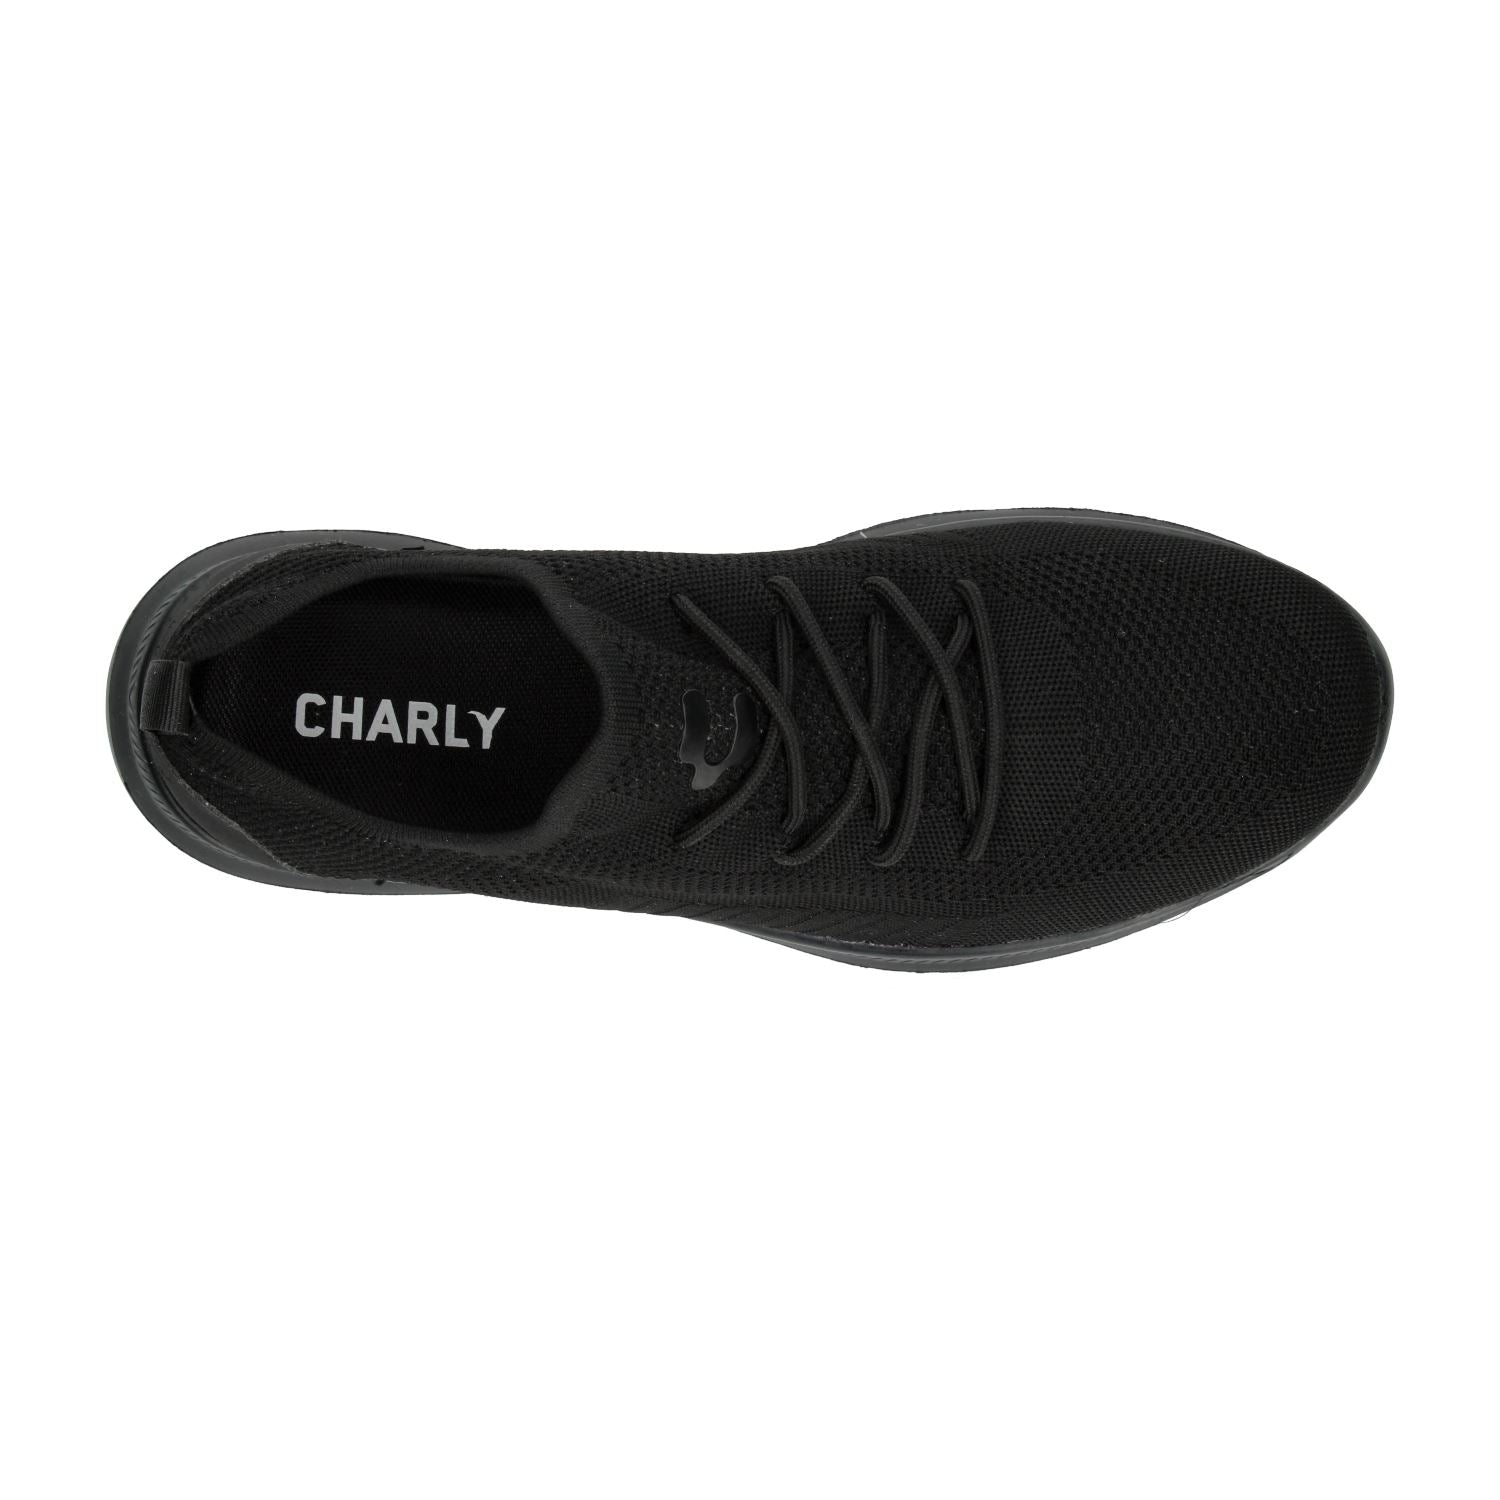 Tenis Charly Negro para Hombre [CHY3240] CHARLY 